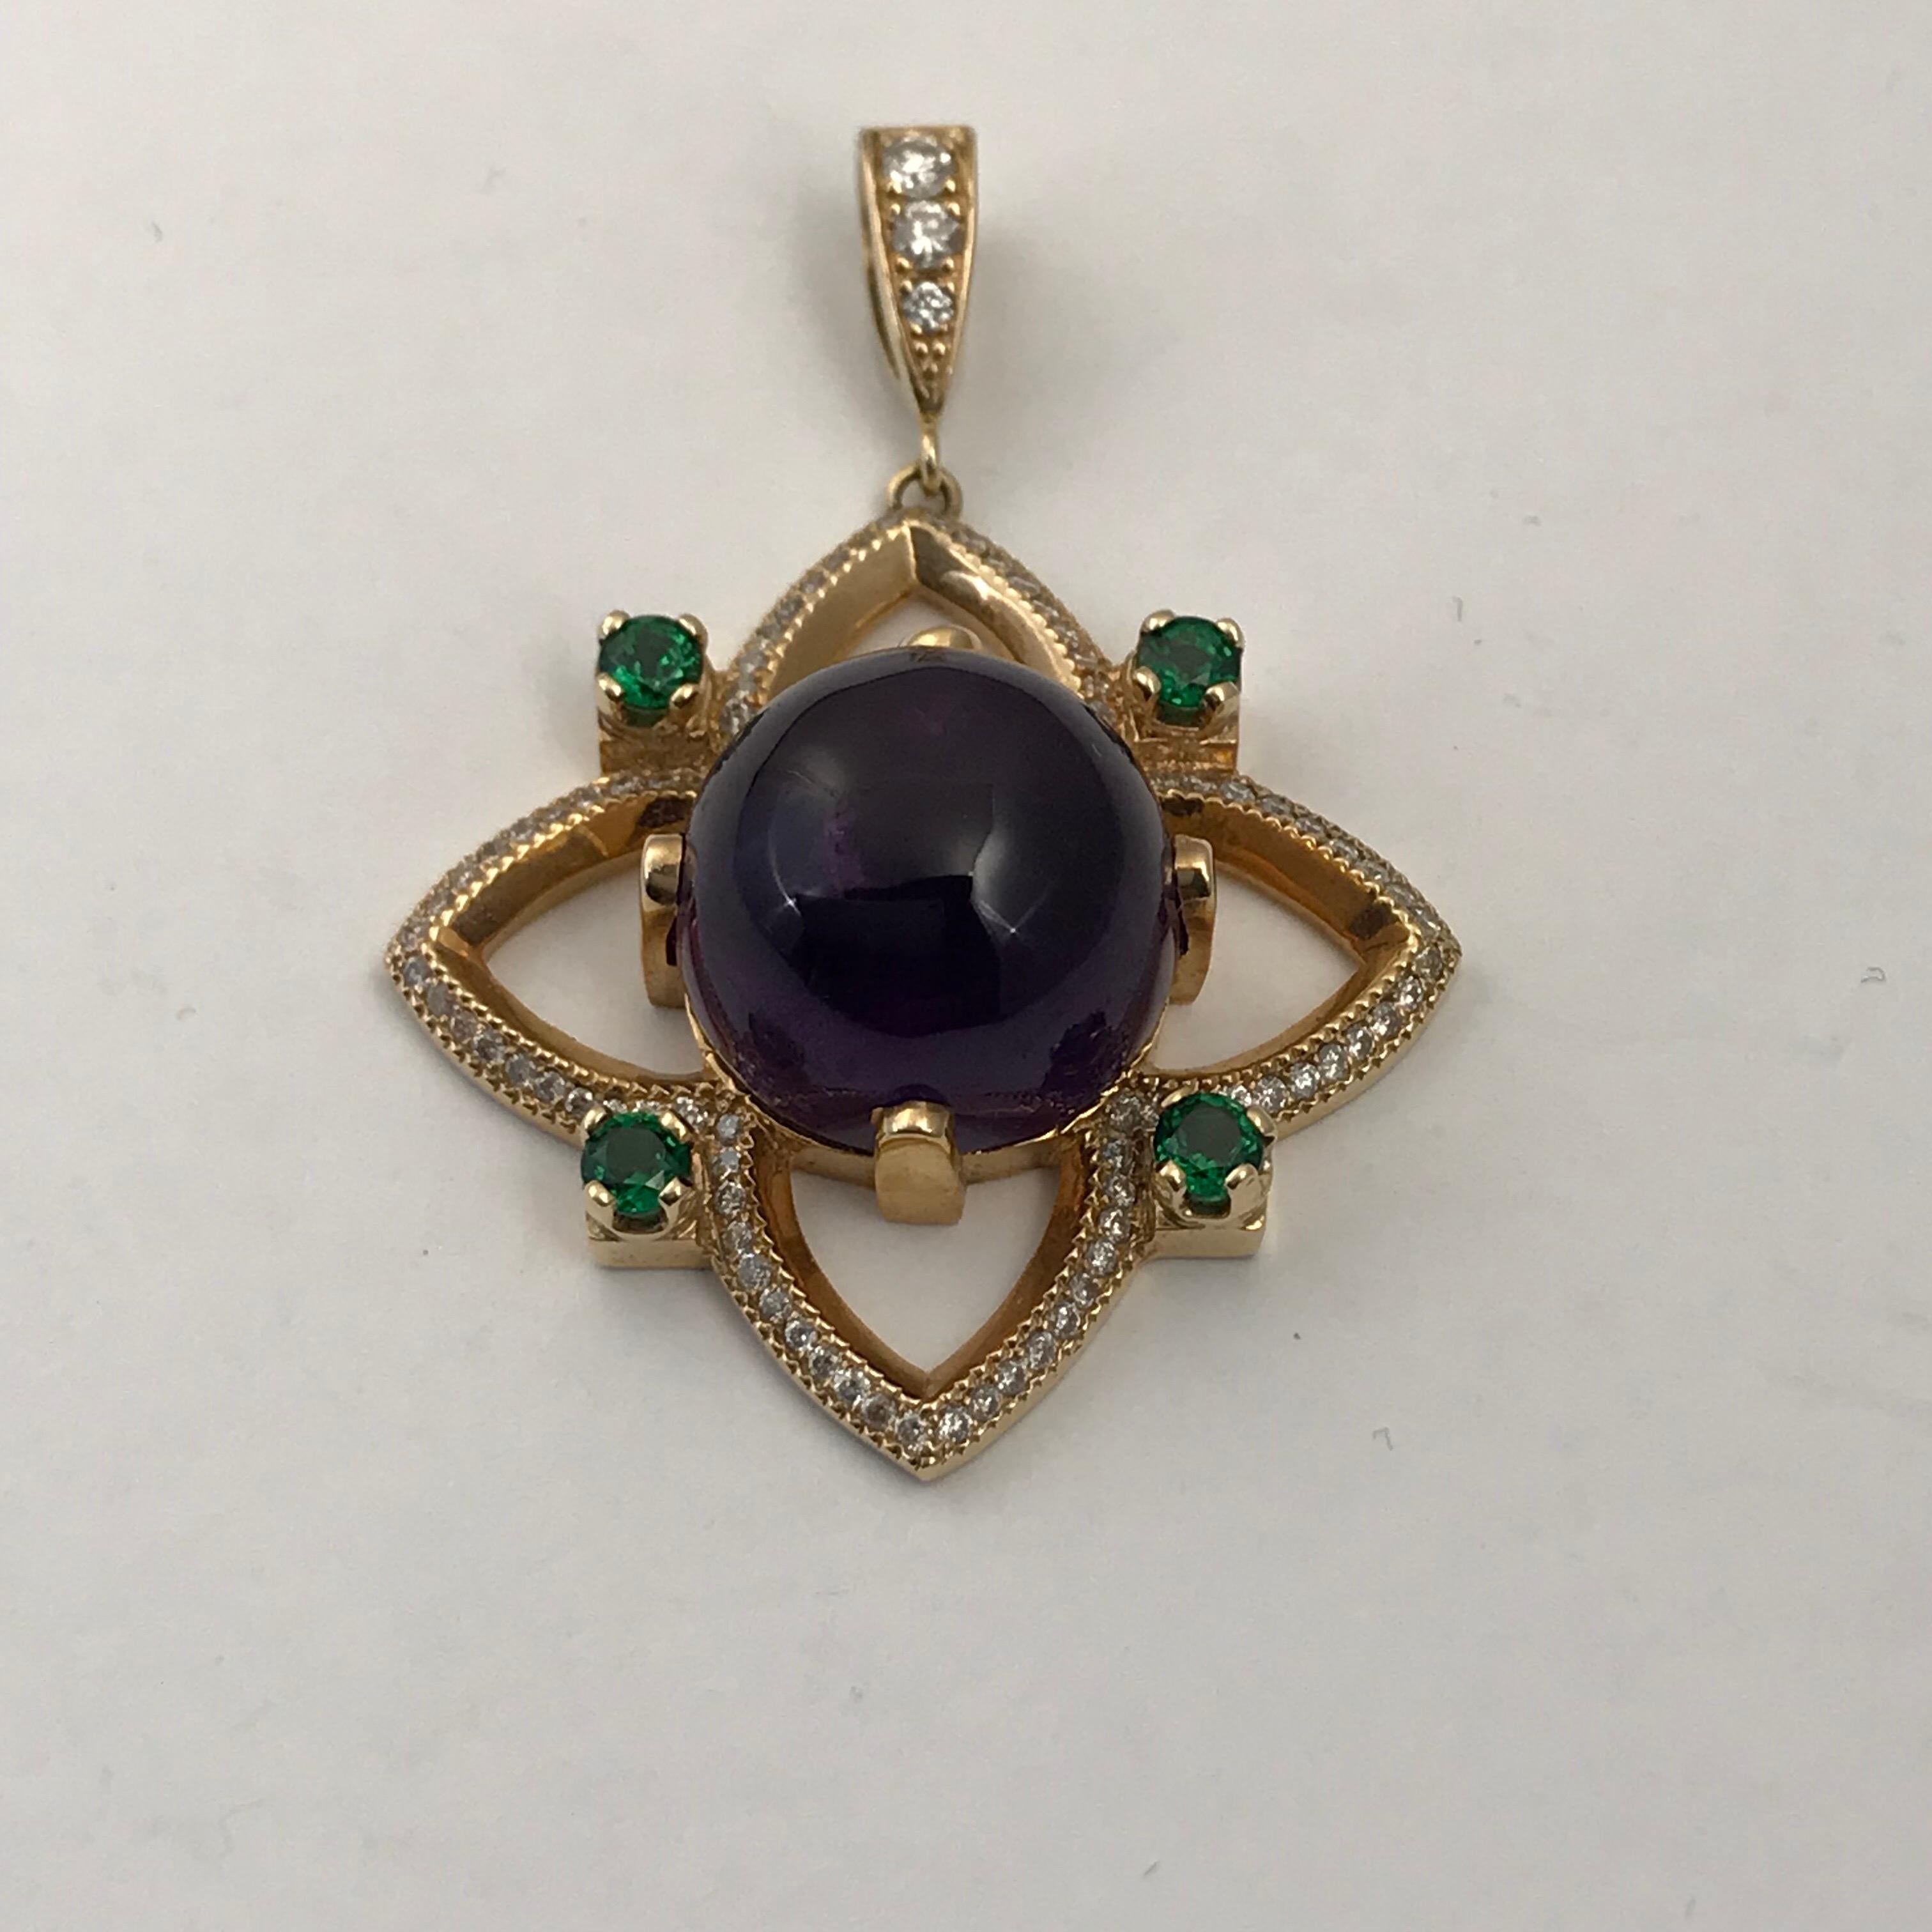 28 Carat Bolivian Amethyst Cabochon Pendant Set in 18 Karat Rose Gold In New Condition For Sale In Austin, TX